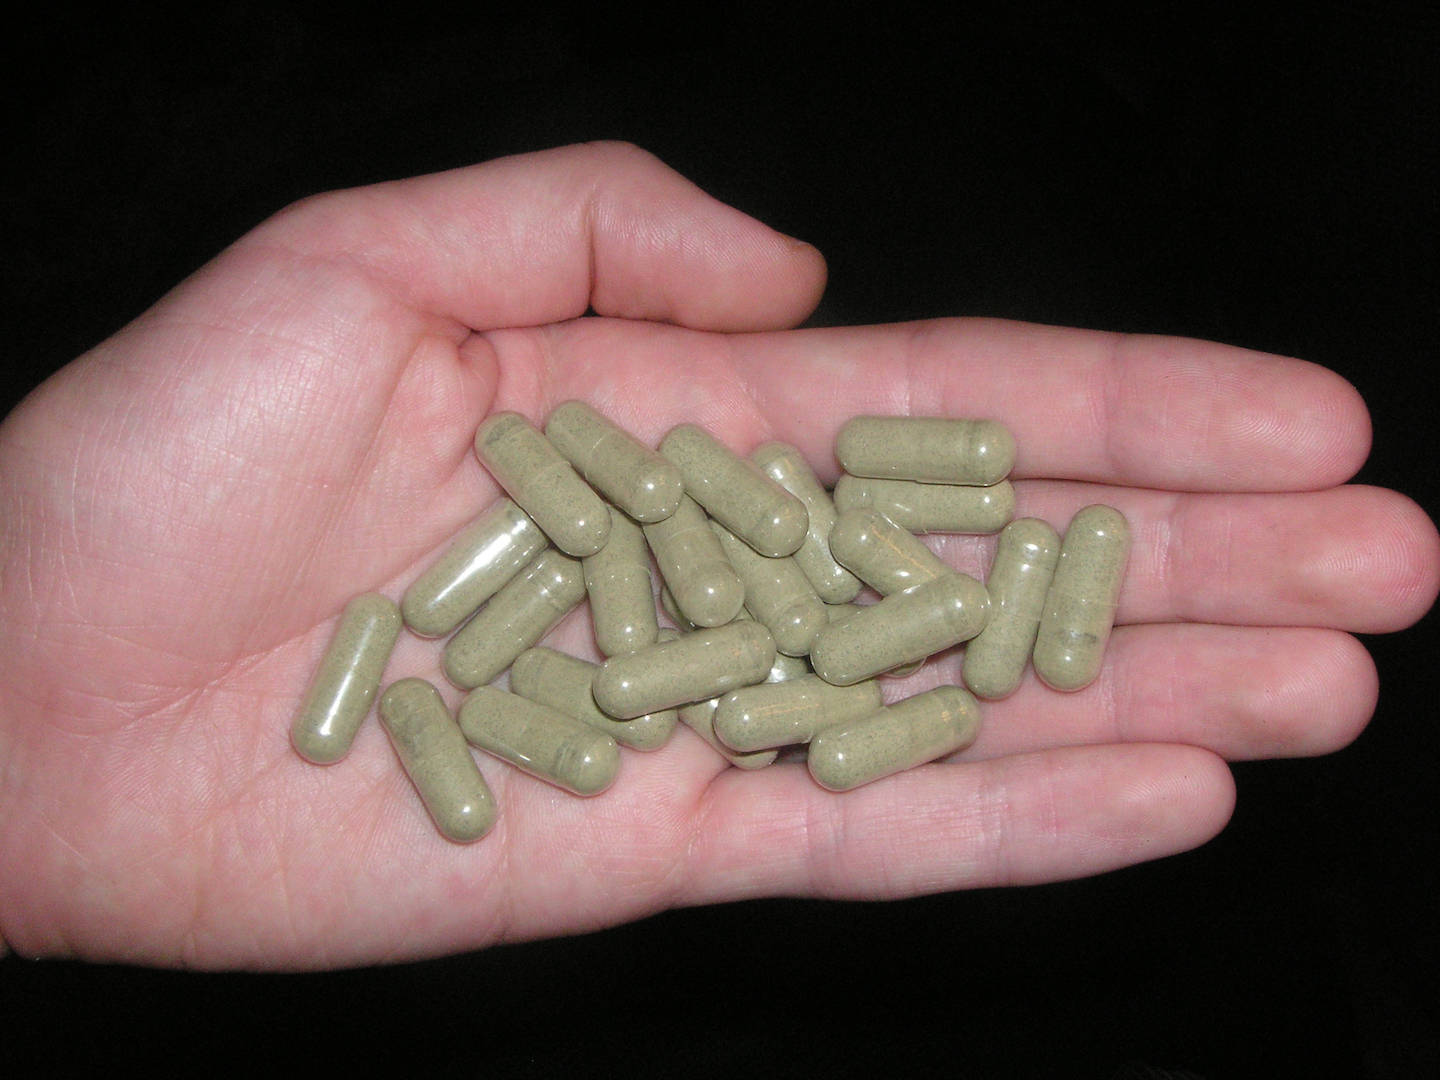 The DEA is accepting public opinions and stories on the benefits of kratom